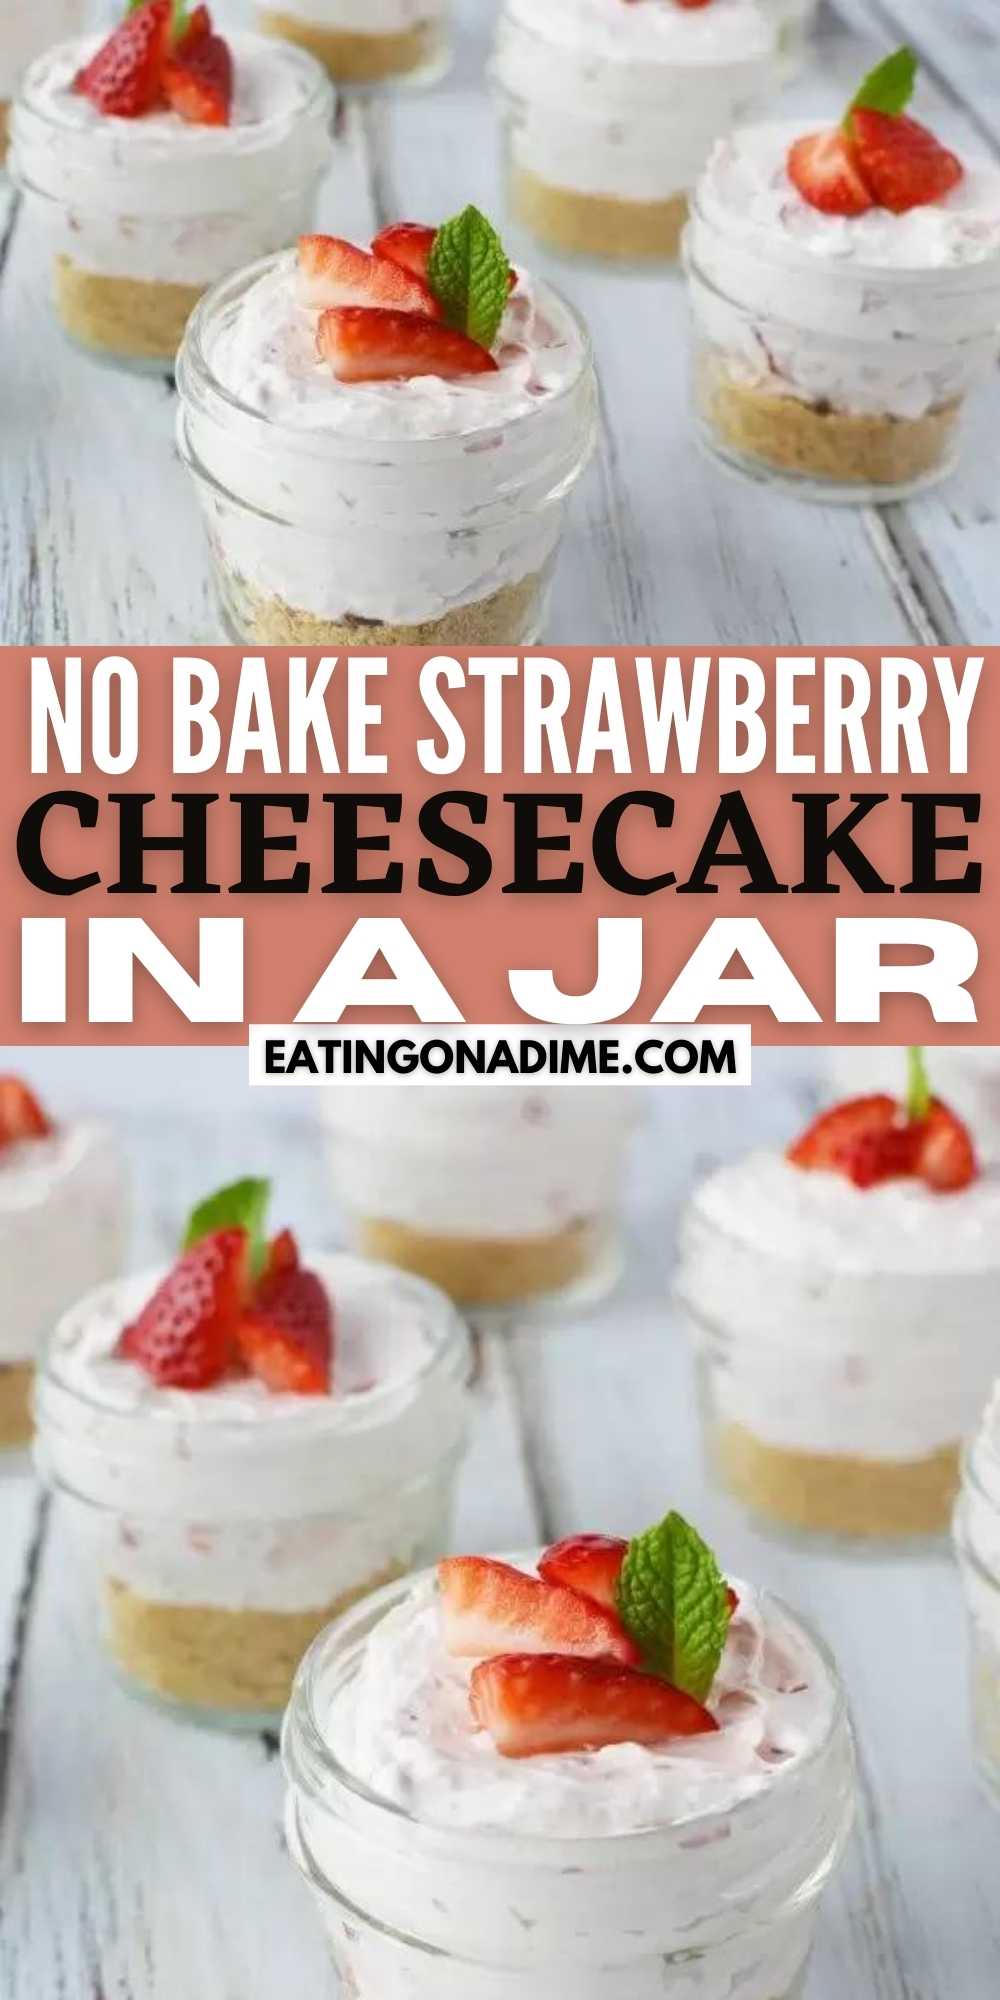 This adorable No Bake Strawberry Cheesecake in a Jar recipe is so yummy! You will love this Strawberry Cheesecake Recipe. These no bake strawberry cheesecake parfaits are easy to make and great for a party too.  Everyone loves this no bake strawberry cheesecake recipe. #eatingonadime #nobakerecipes #cheesecakerecipes #easydesserts 
